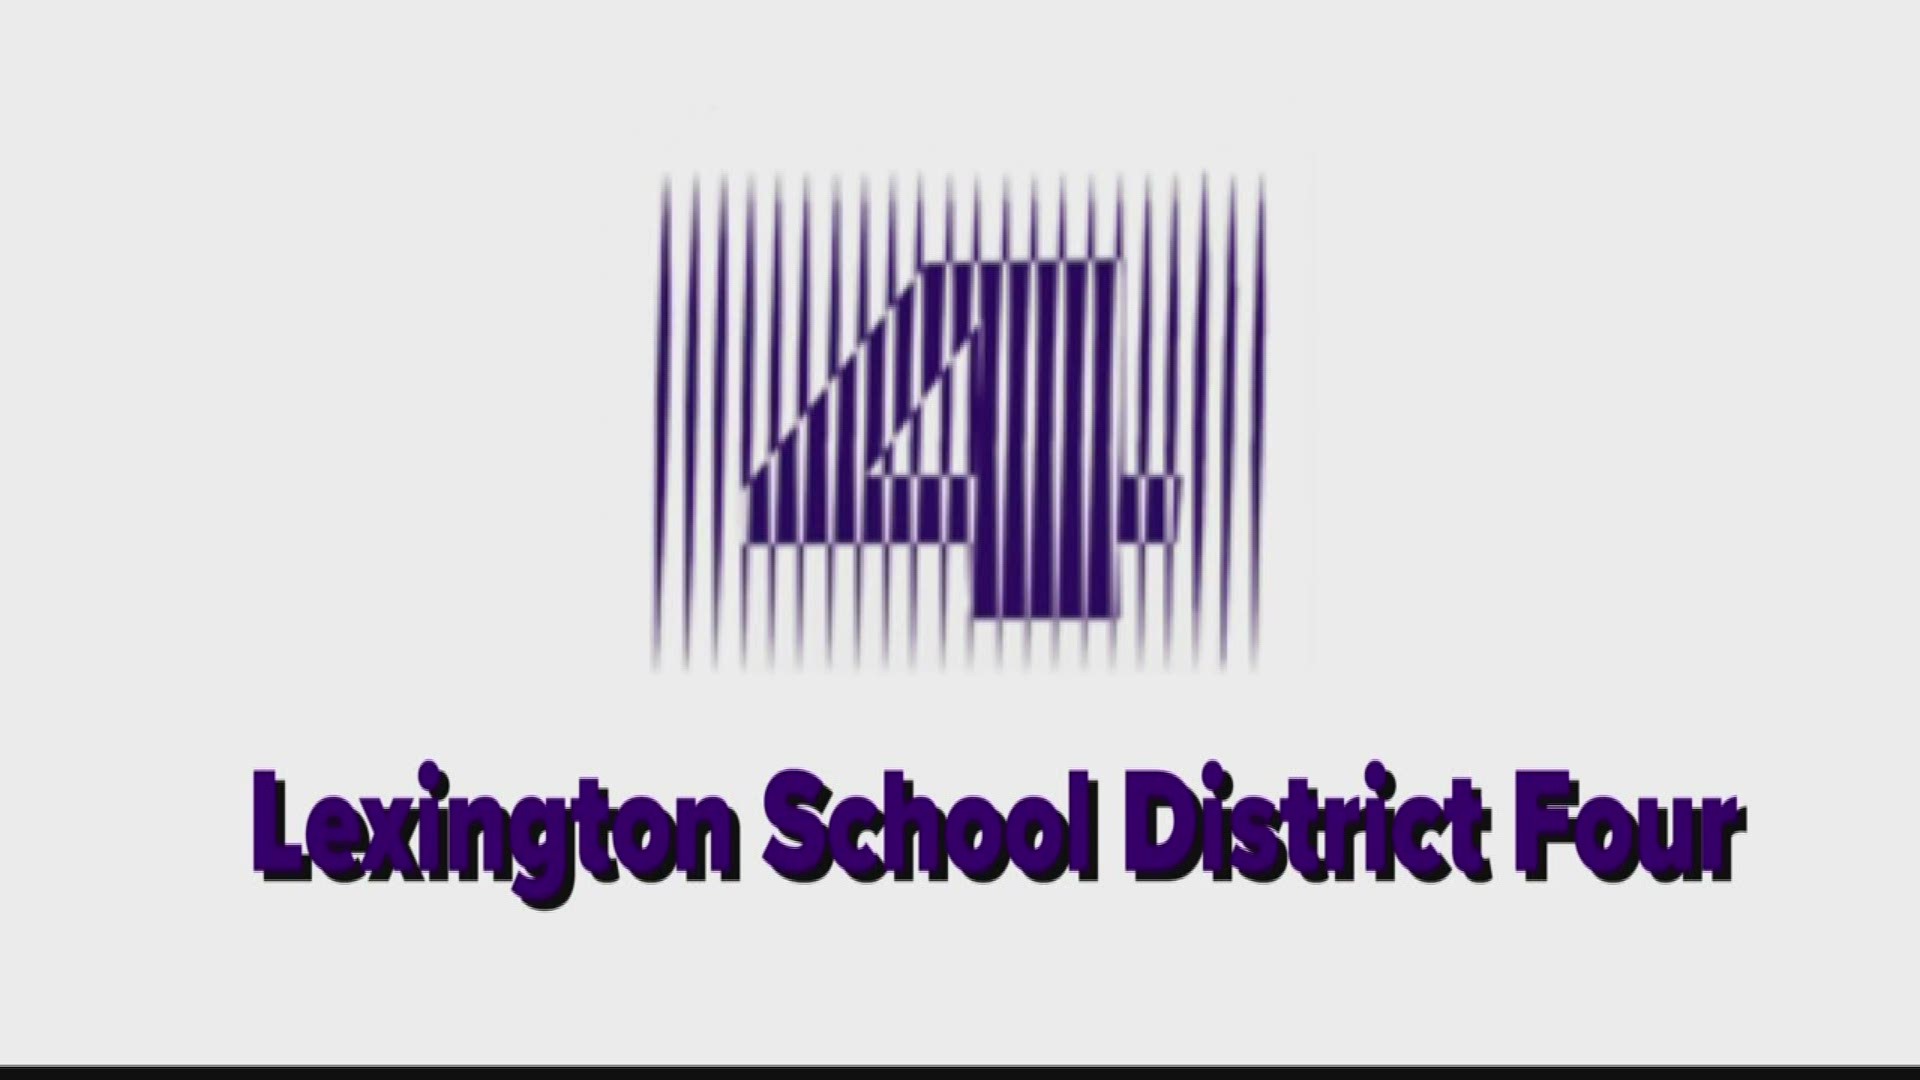 Officials in Lexington say this is an important time for students, so they plan to have classes during the teacher rally Wednesday.